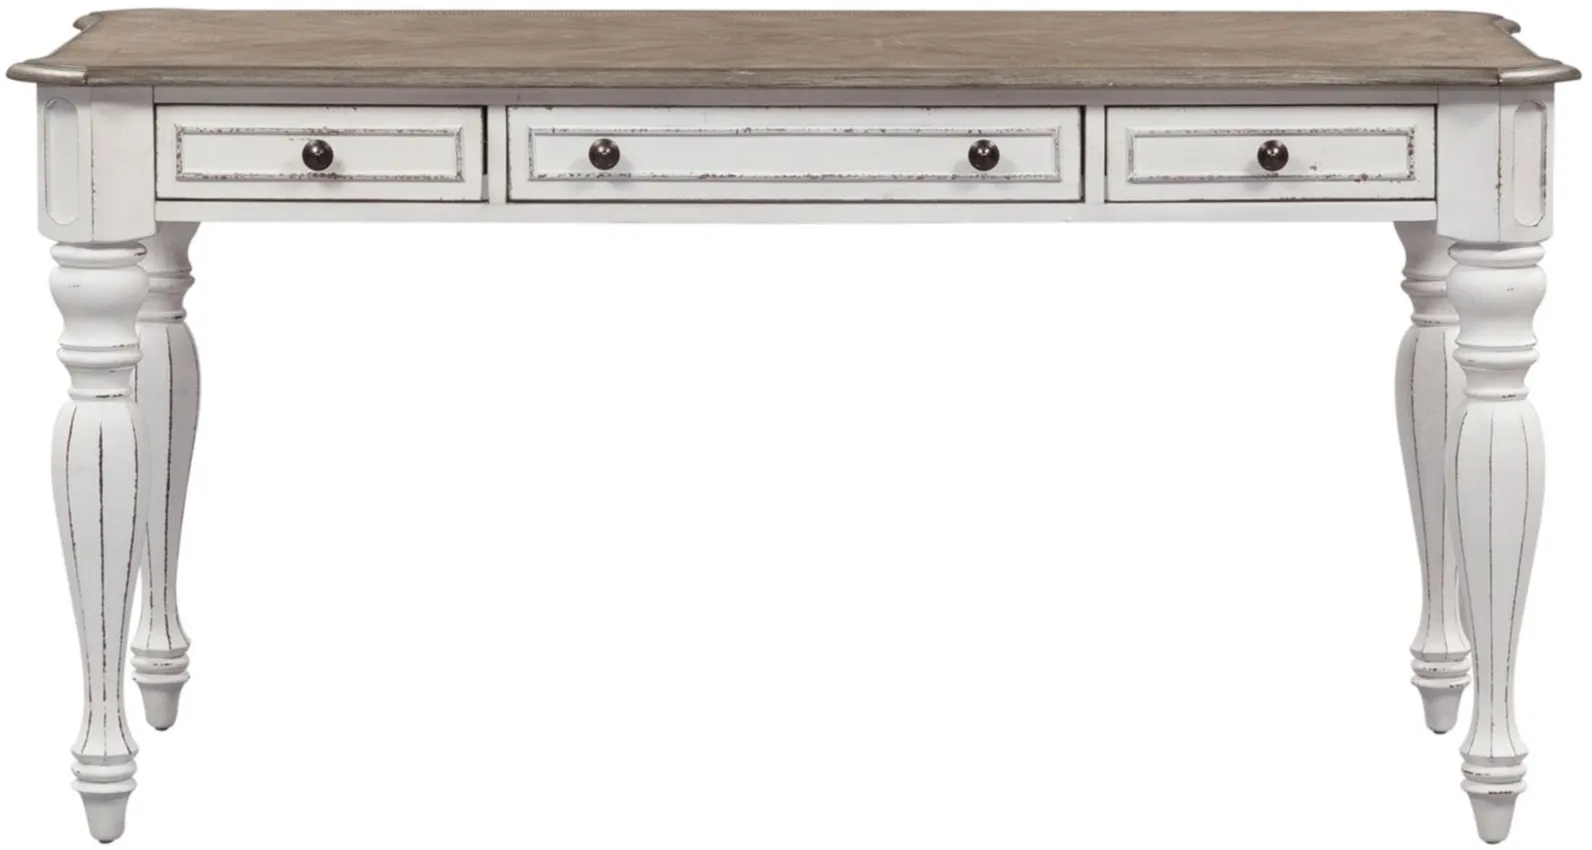 Magnolia Manor Writing Desk in Antique White Base w/ Weathered Bark Tops by Liberty Furniture